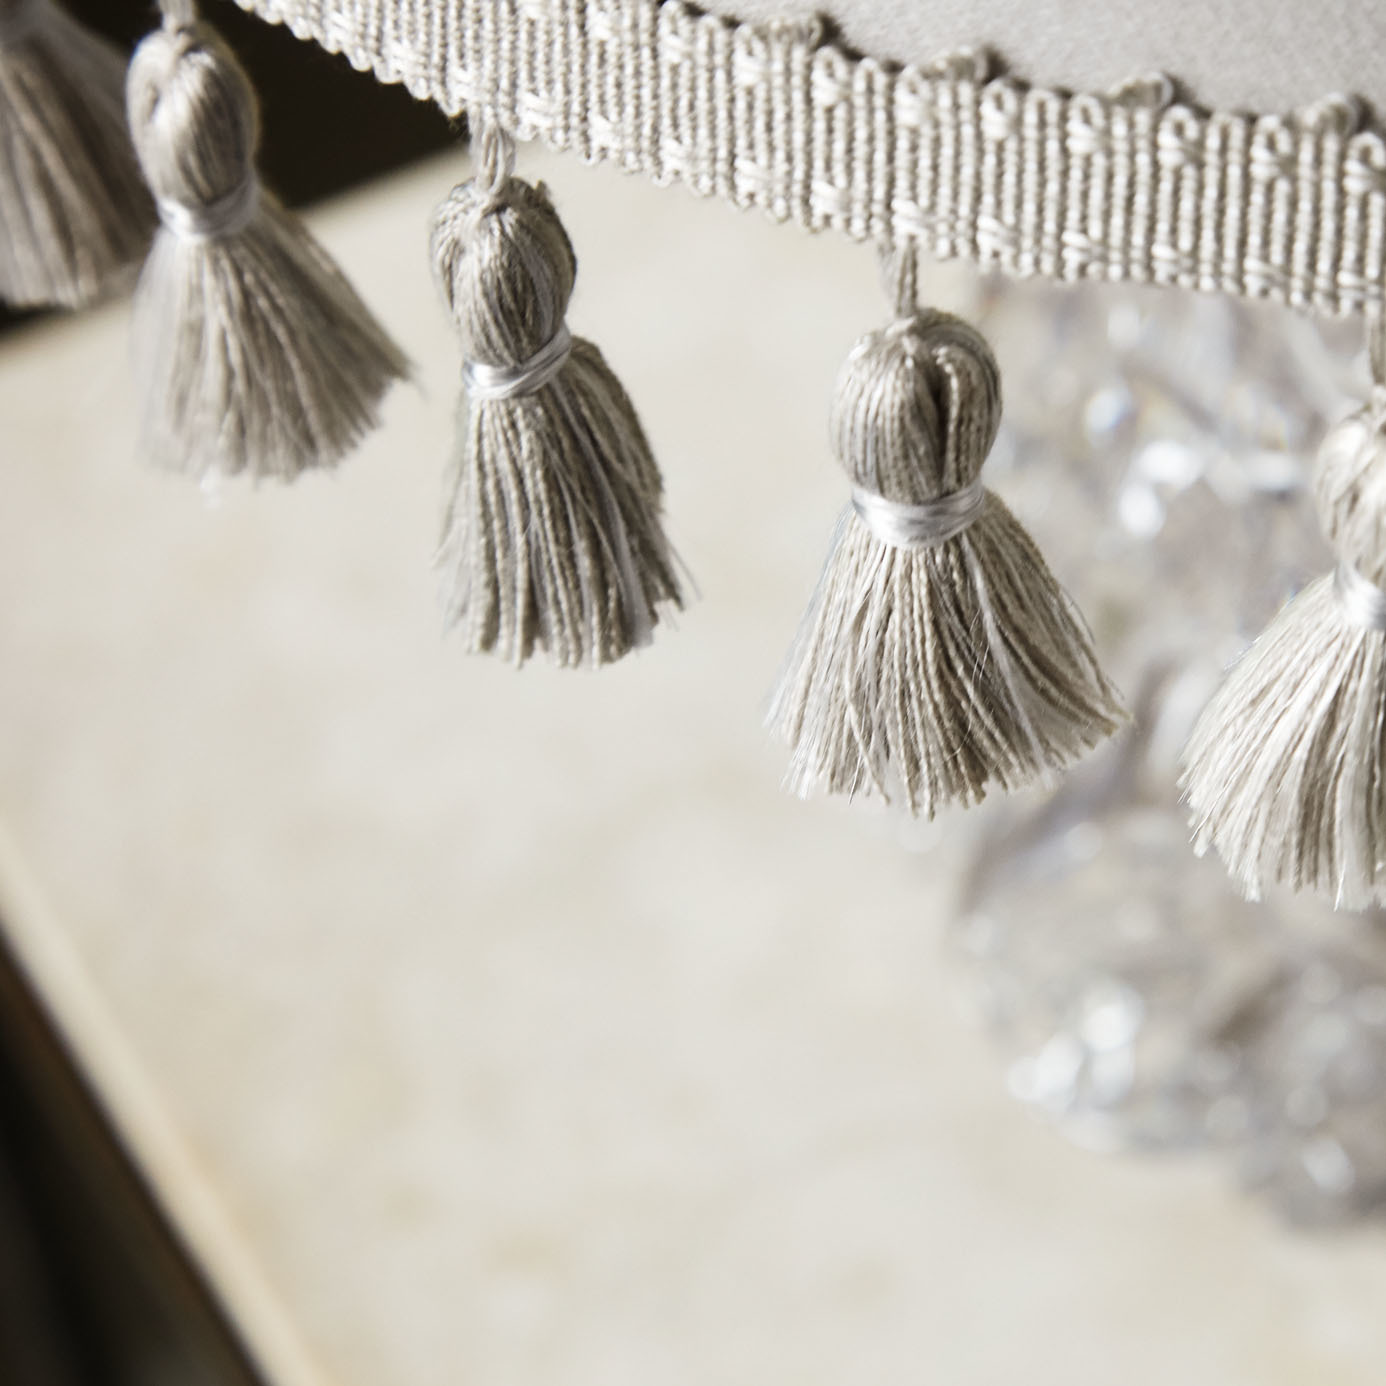 Tassel Fringe Anthracite Trimmings by ZOF